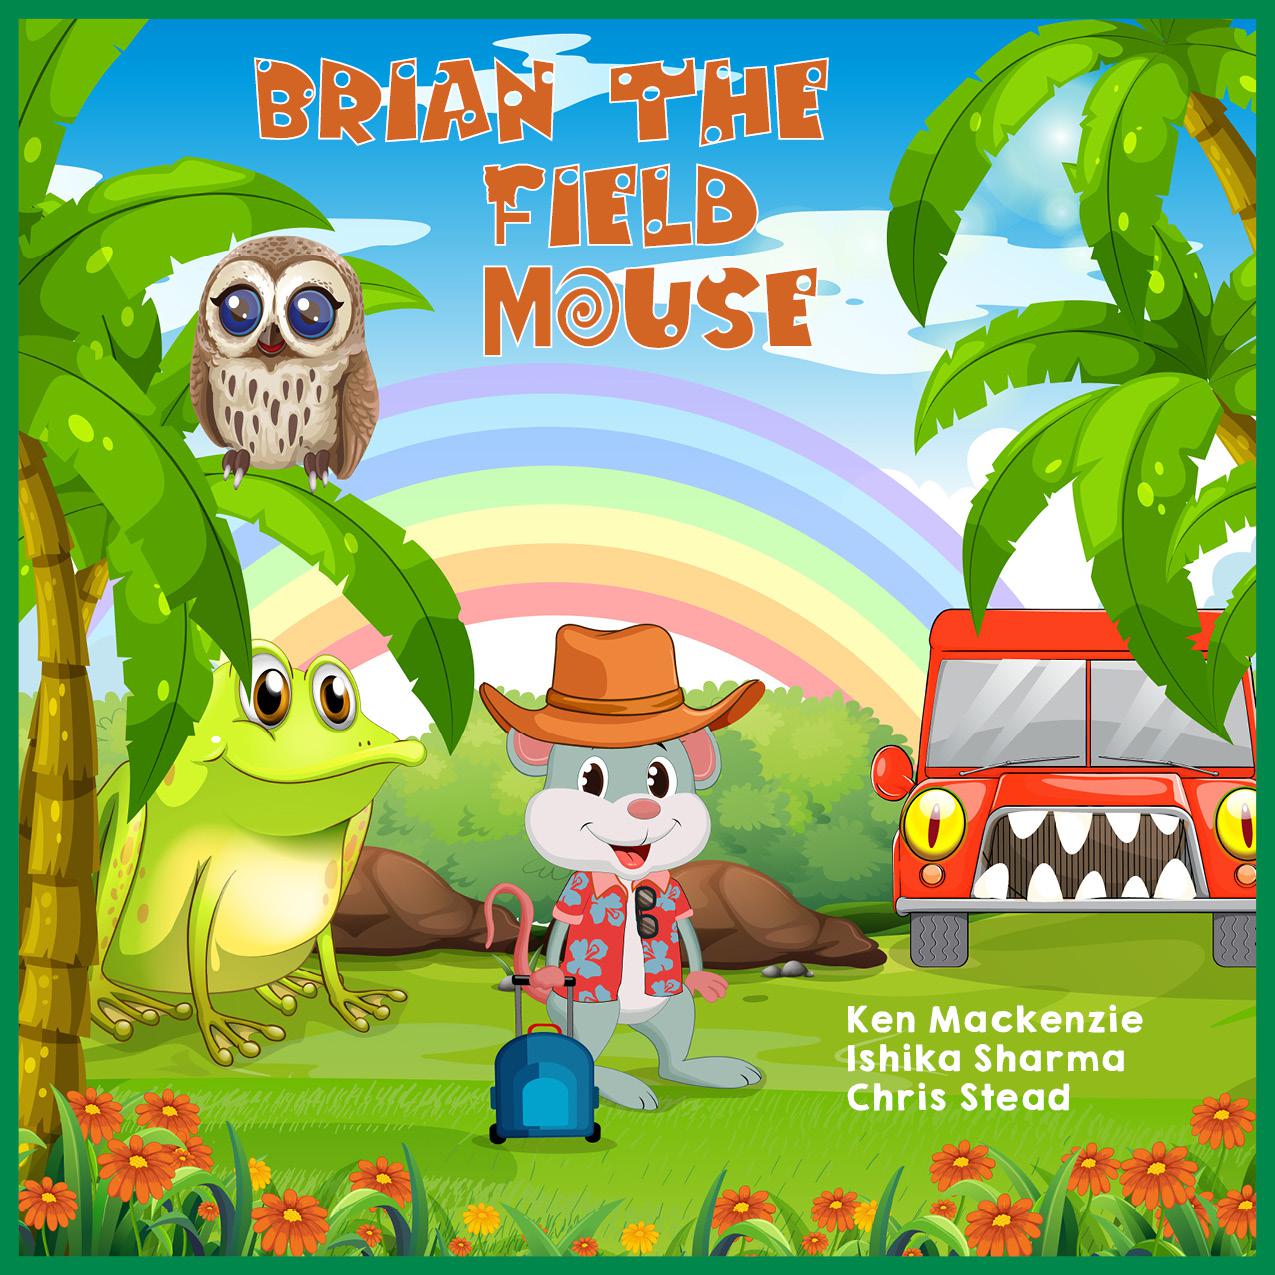 FREE: Brian The Field Mouse: A Cool Adventure Story For Kids by Ken MacKenzie